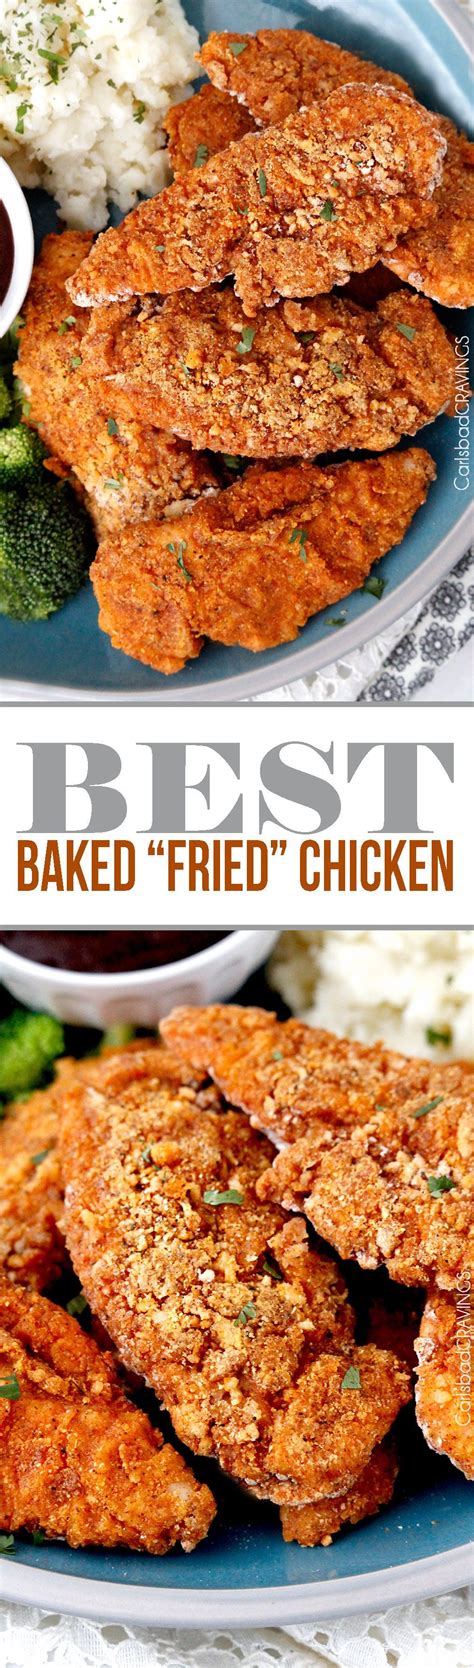 seriously the BEST Baked "fried" chicken! Crispy chicken marinated in spiced buttermilk then ...